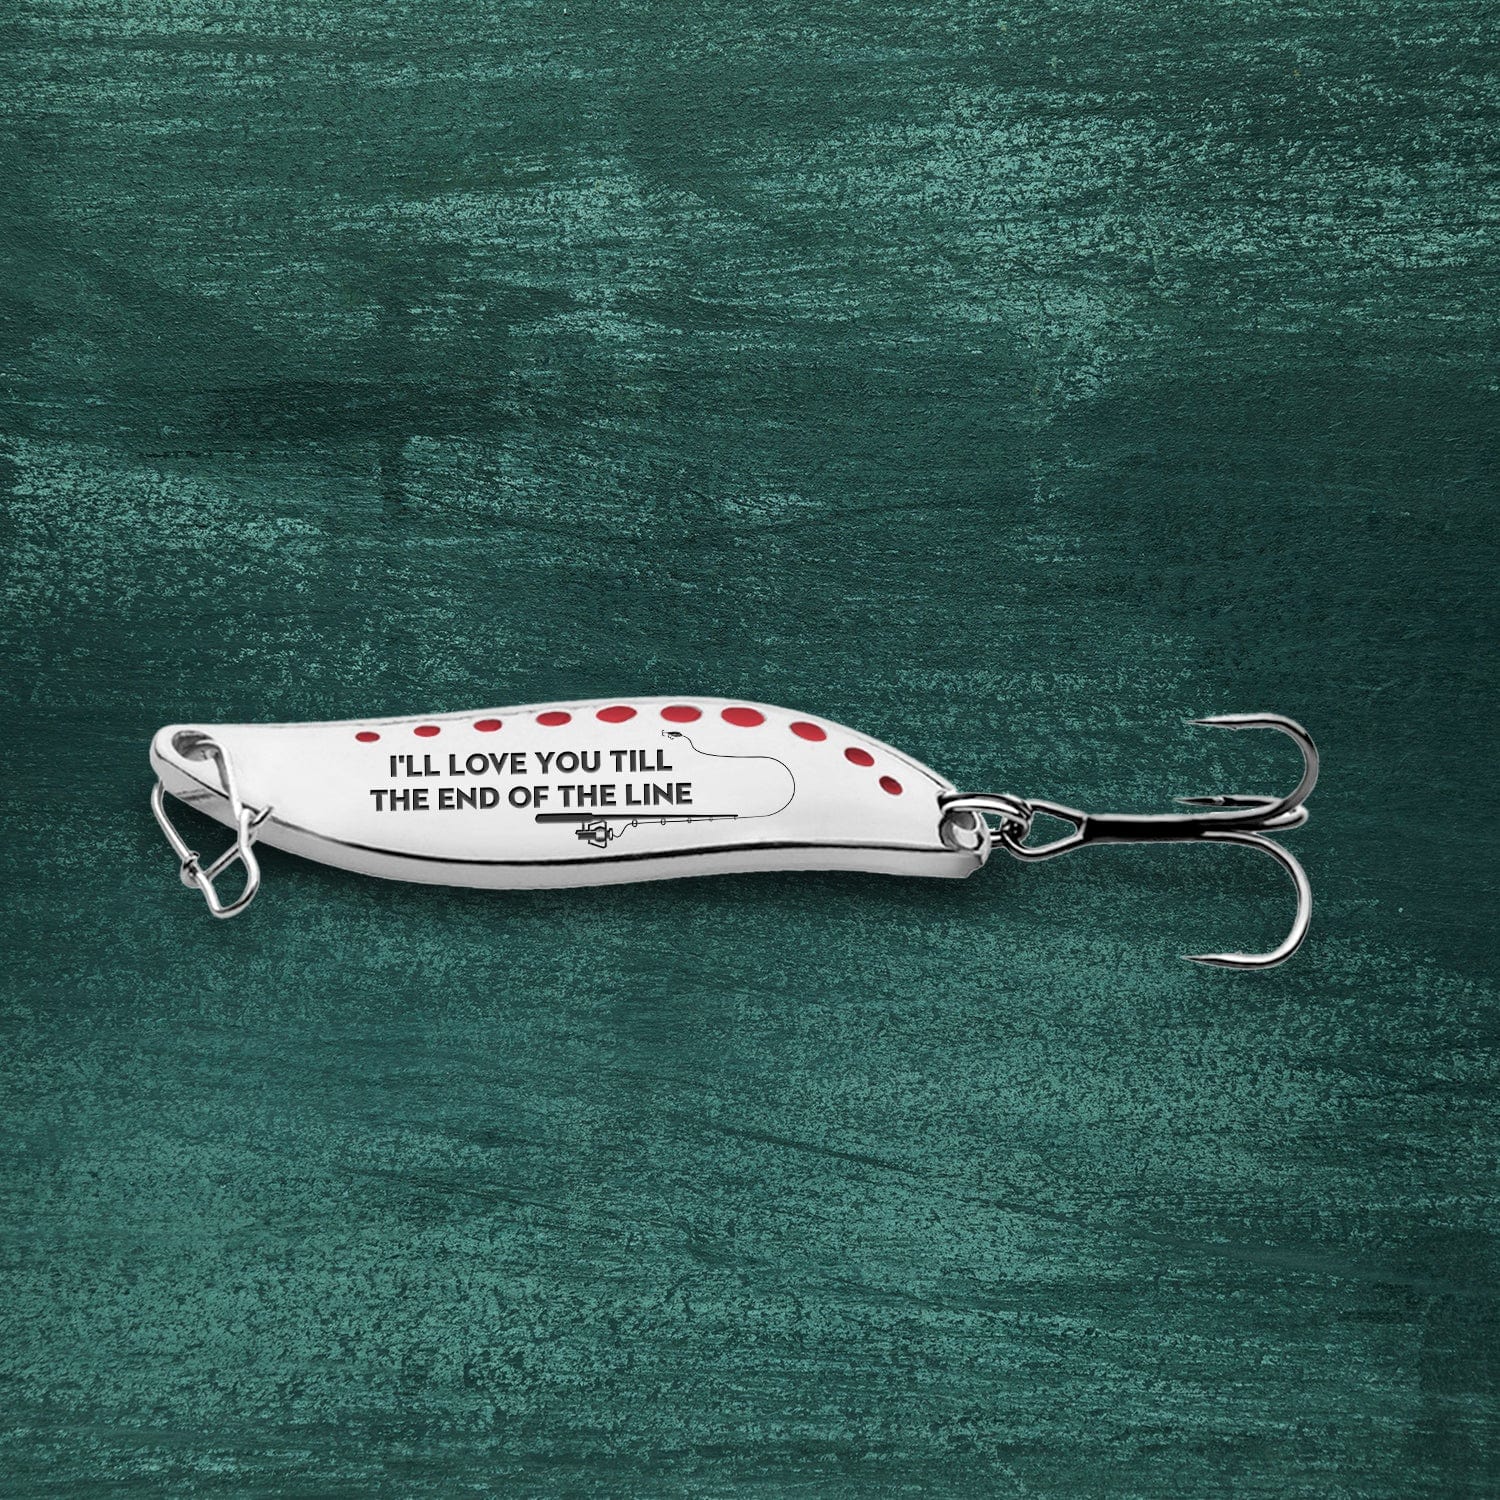 Fishing Lures - Fishing - To My Master Baiter - You Are The Greatest C -  Wrapsify